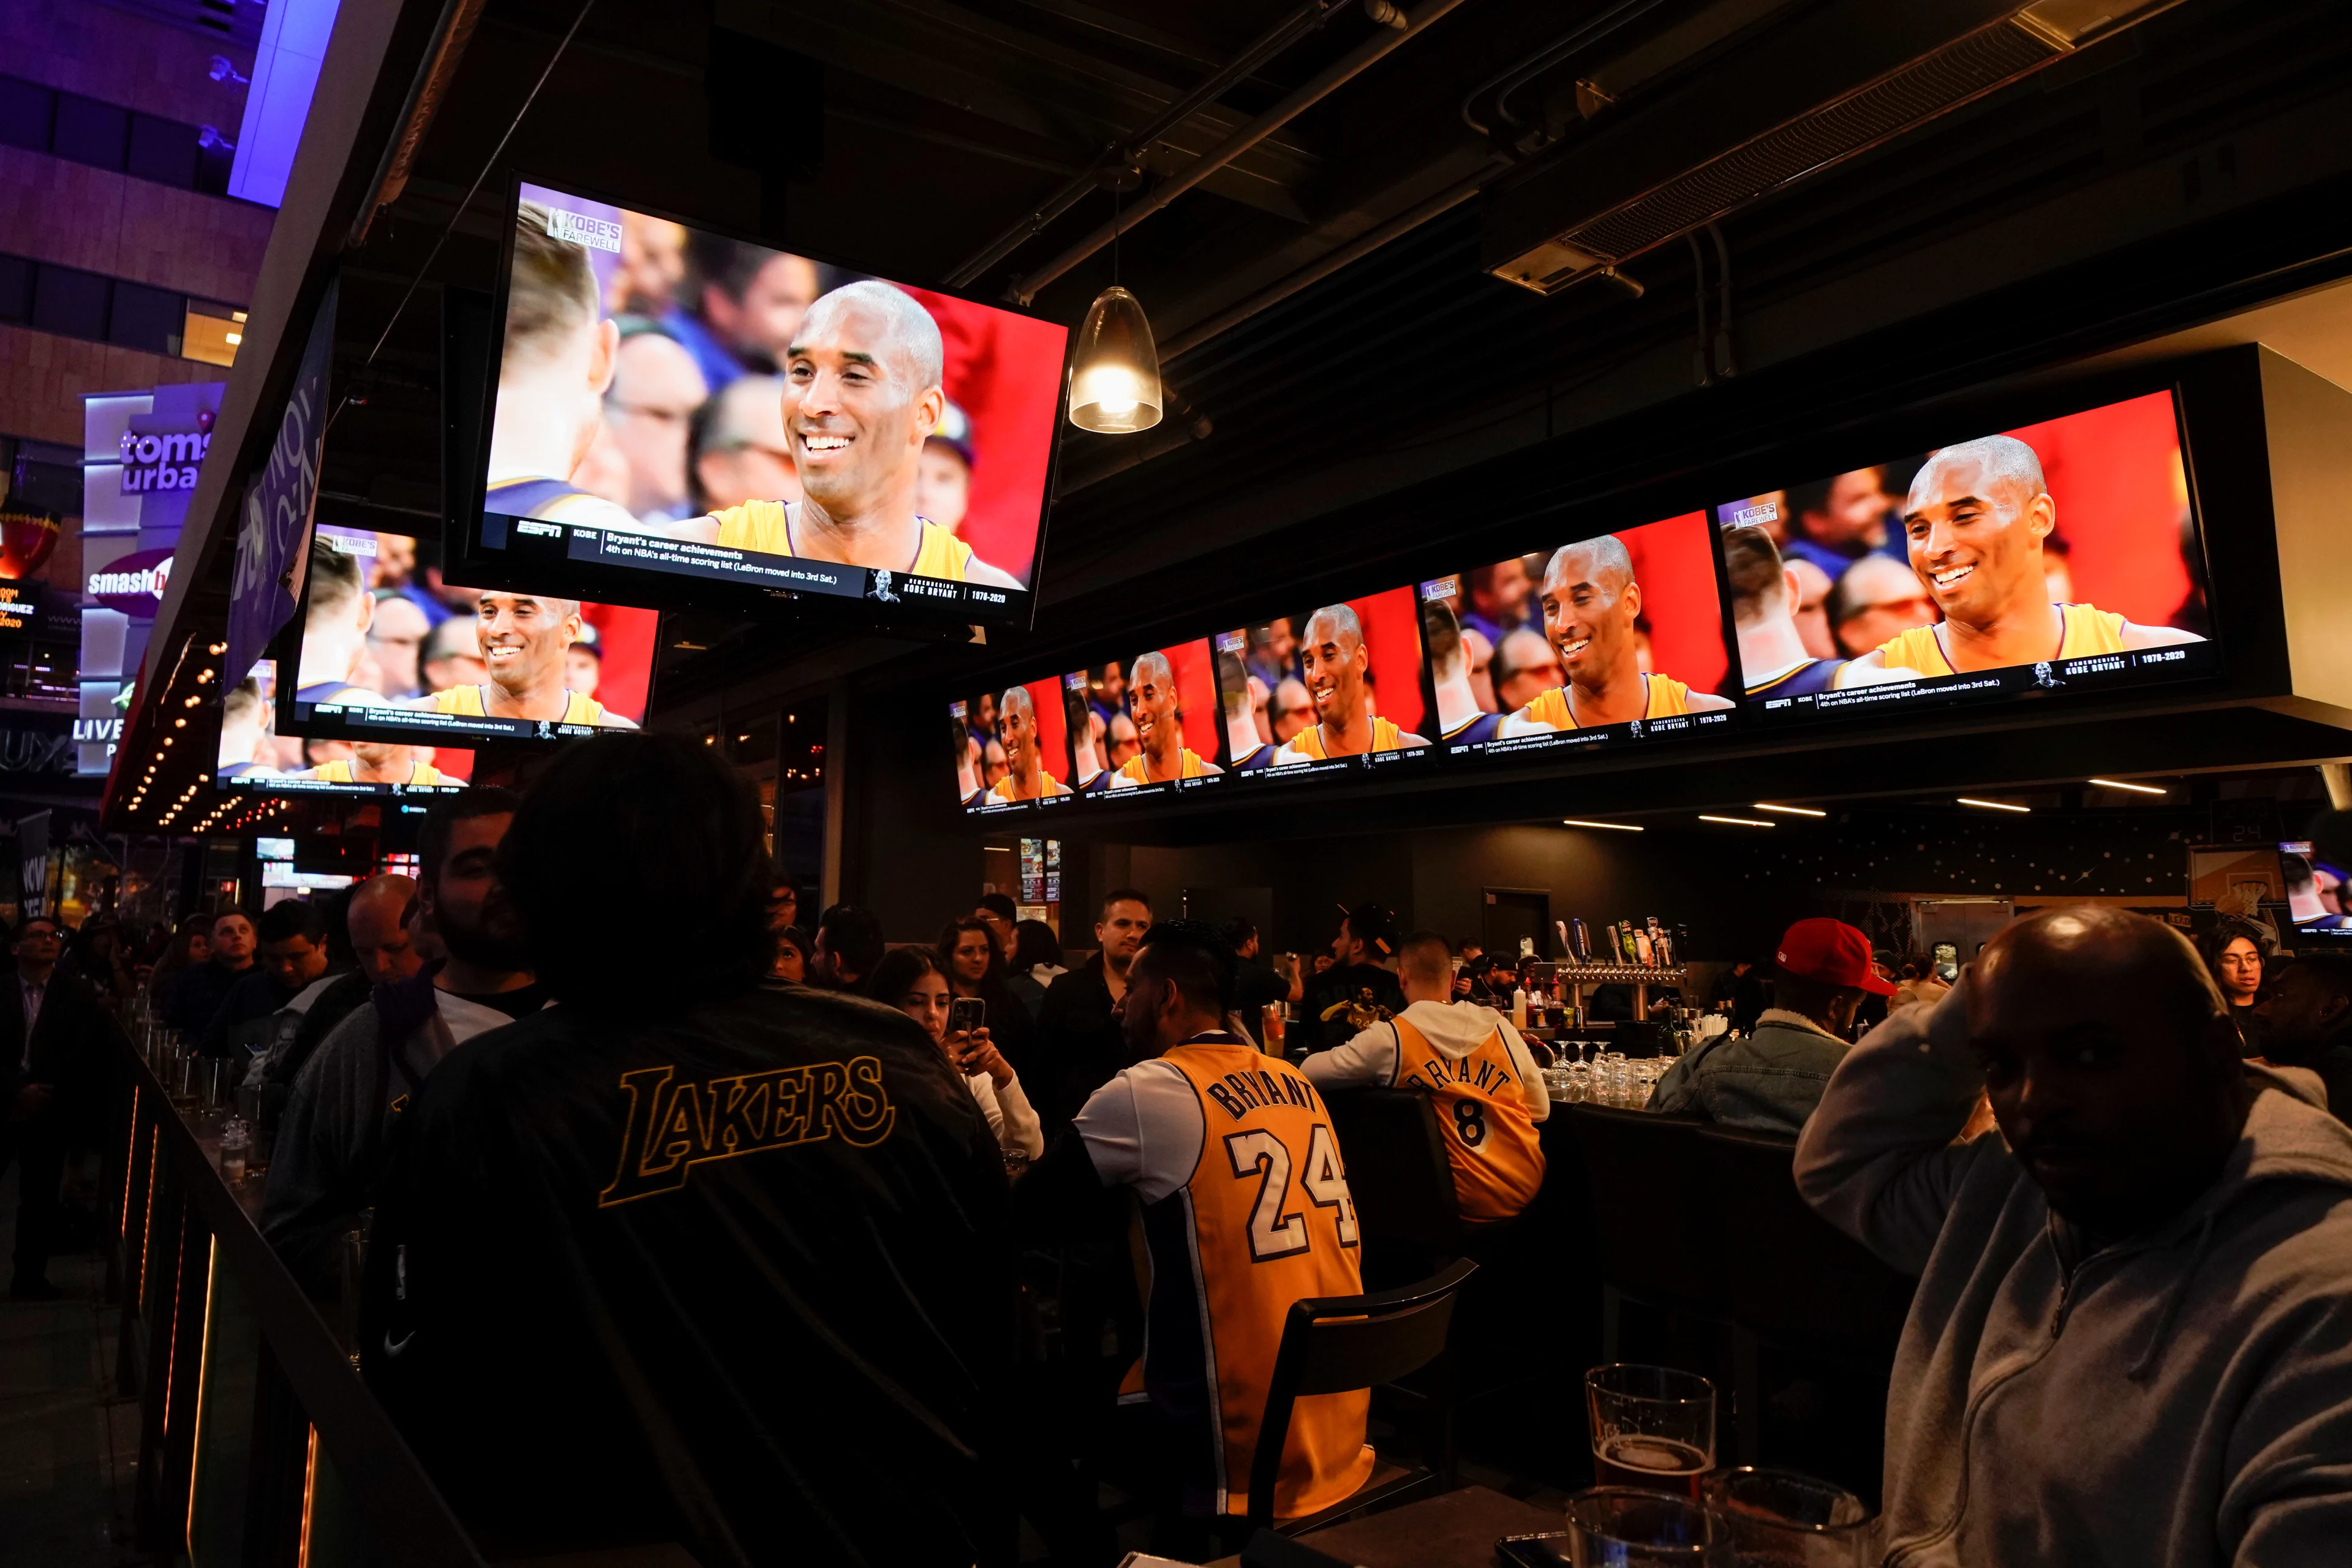 Reuters- Fans of NBA basketball star Kobe Bryant watch a replay of his last NBA game 